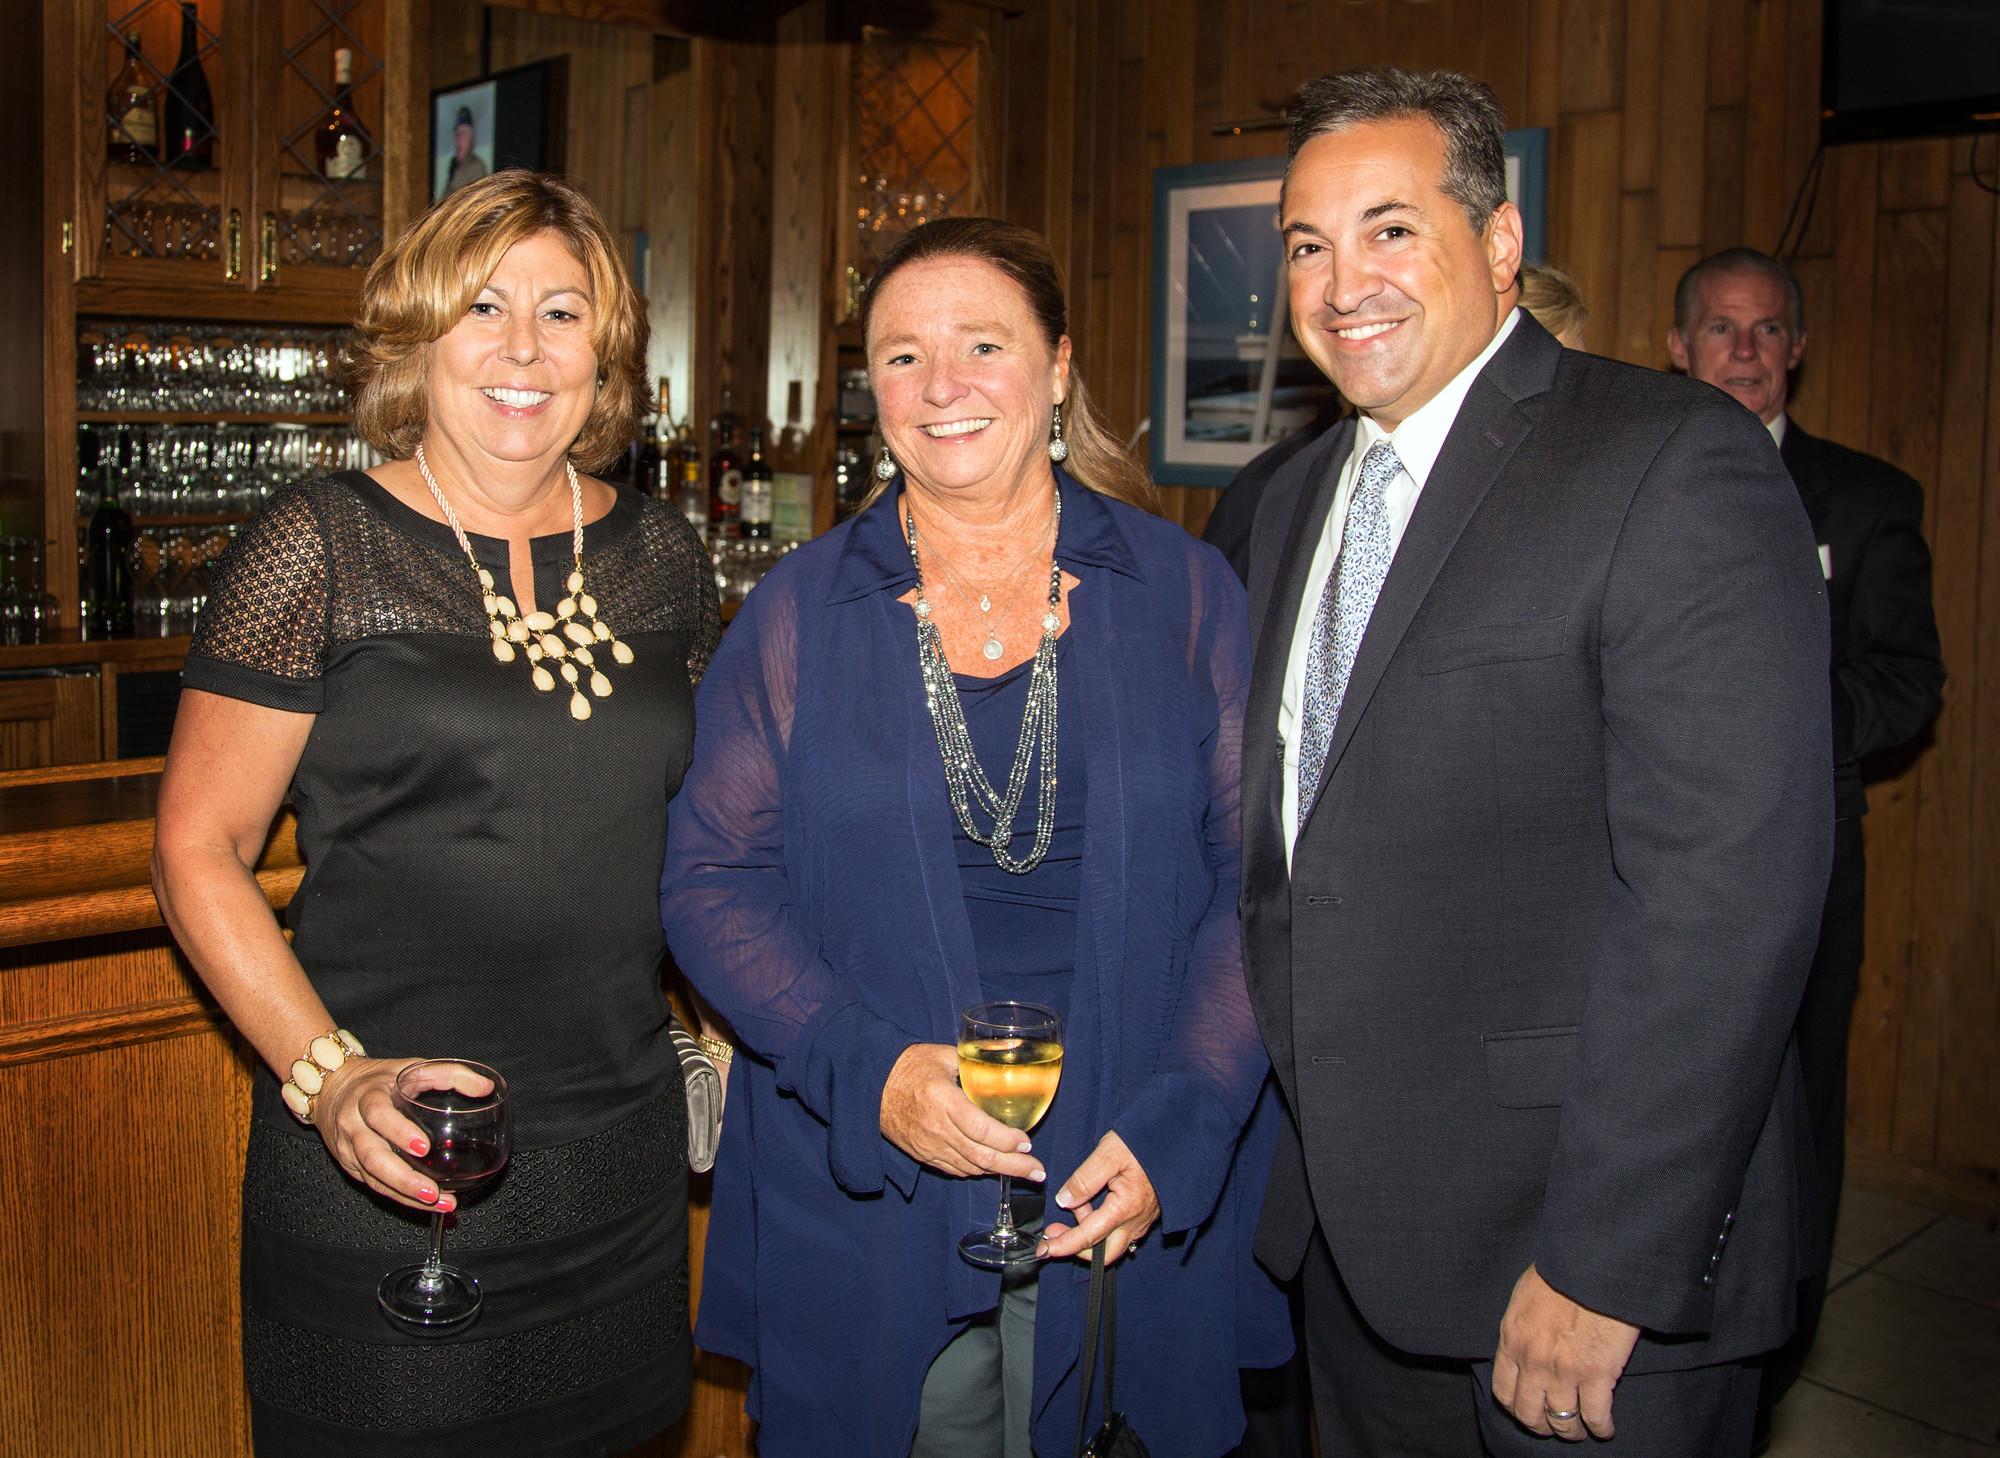 Family and friends of the honorees celebrated together during the cocktail hour. Pictured here are the mayor’s sister Rosemary Murray, Mayor Francis X. Murray’s wife Barbara and Village Trustee Michael Sepe.